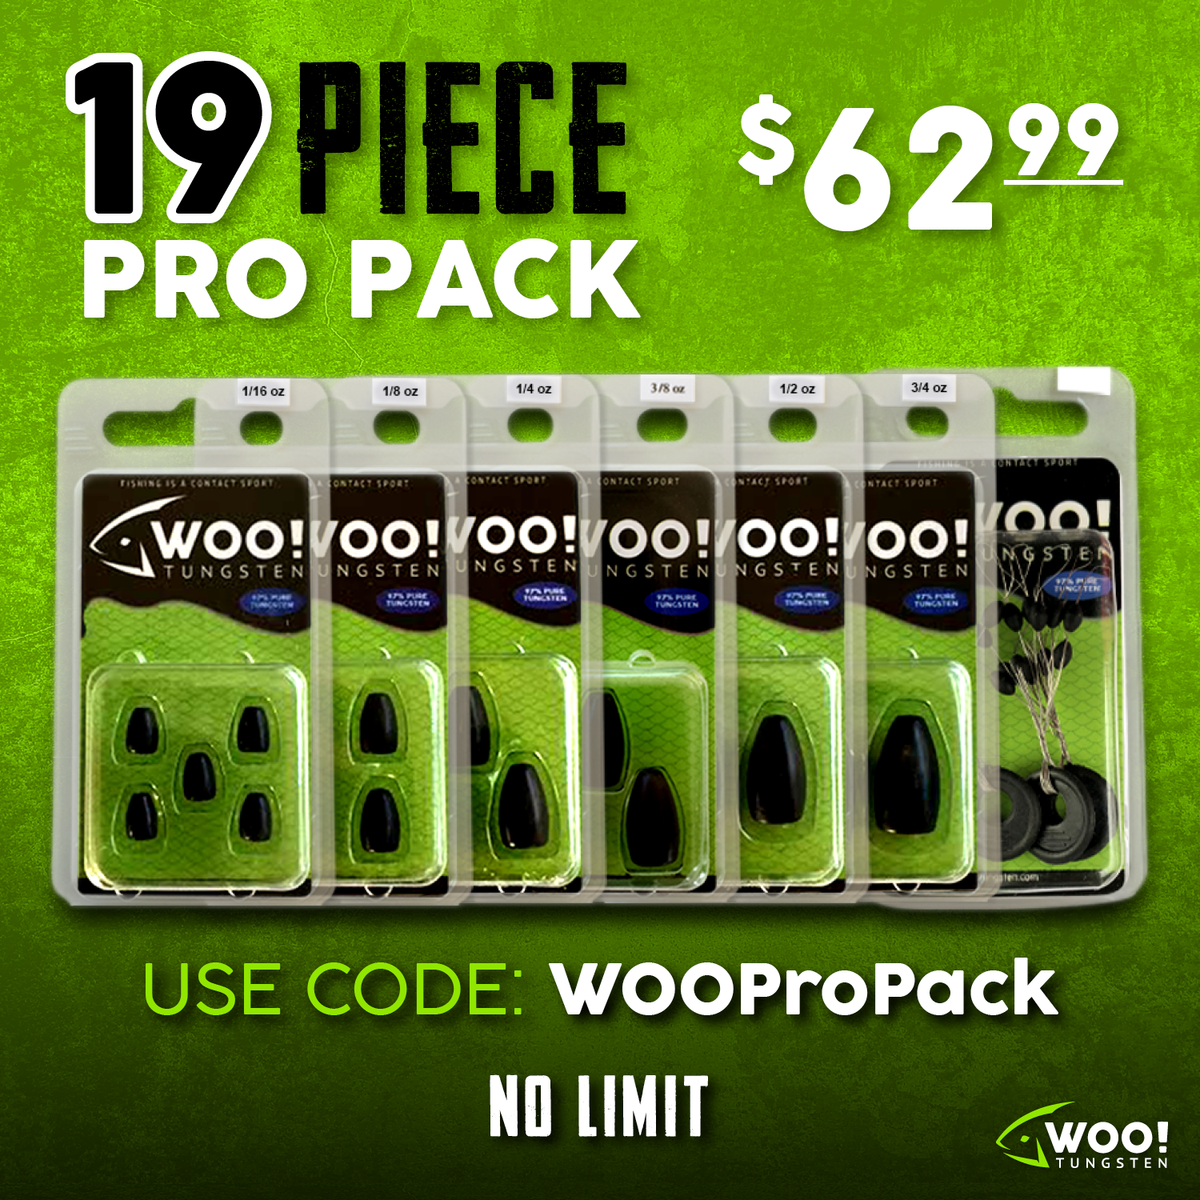 PRO PACK - 19 Piece - Between 1/16 oz and 3/4 oz (Black) - USE CODE W –  WOO! Tungsten Canada